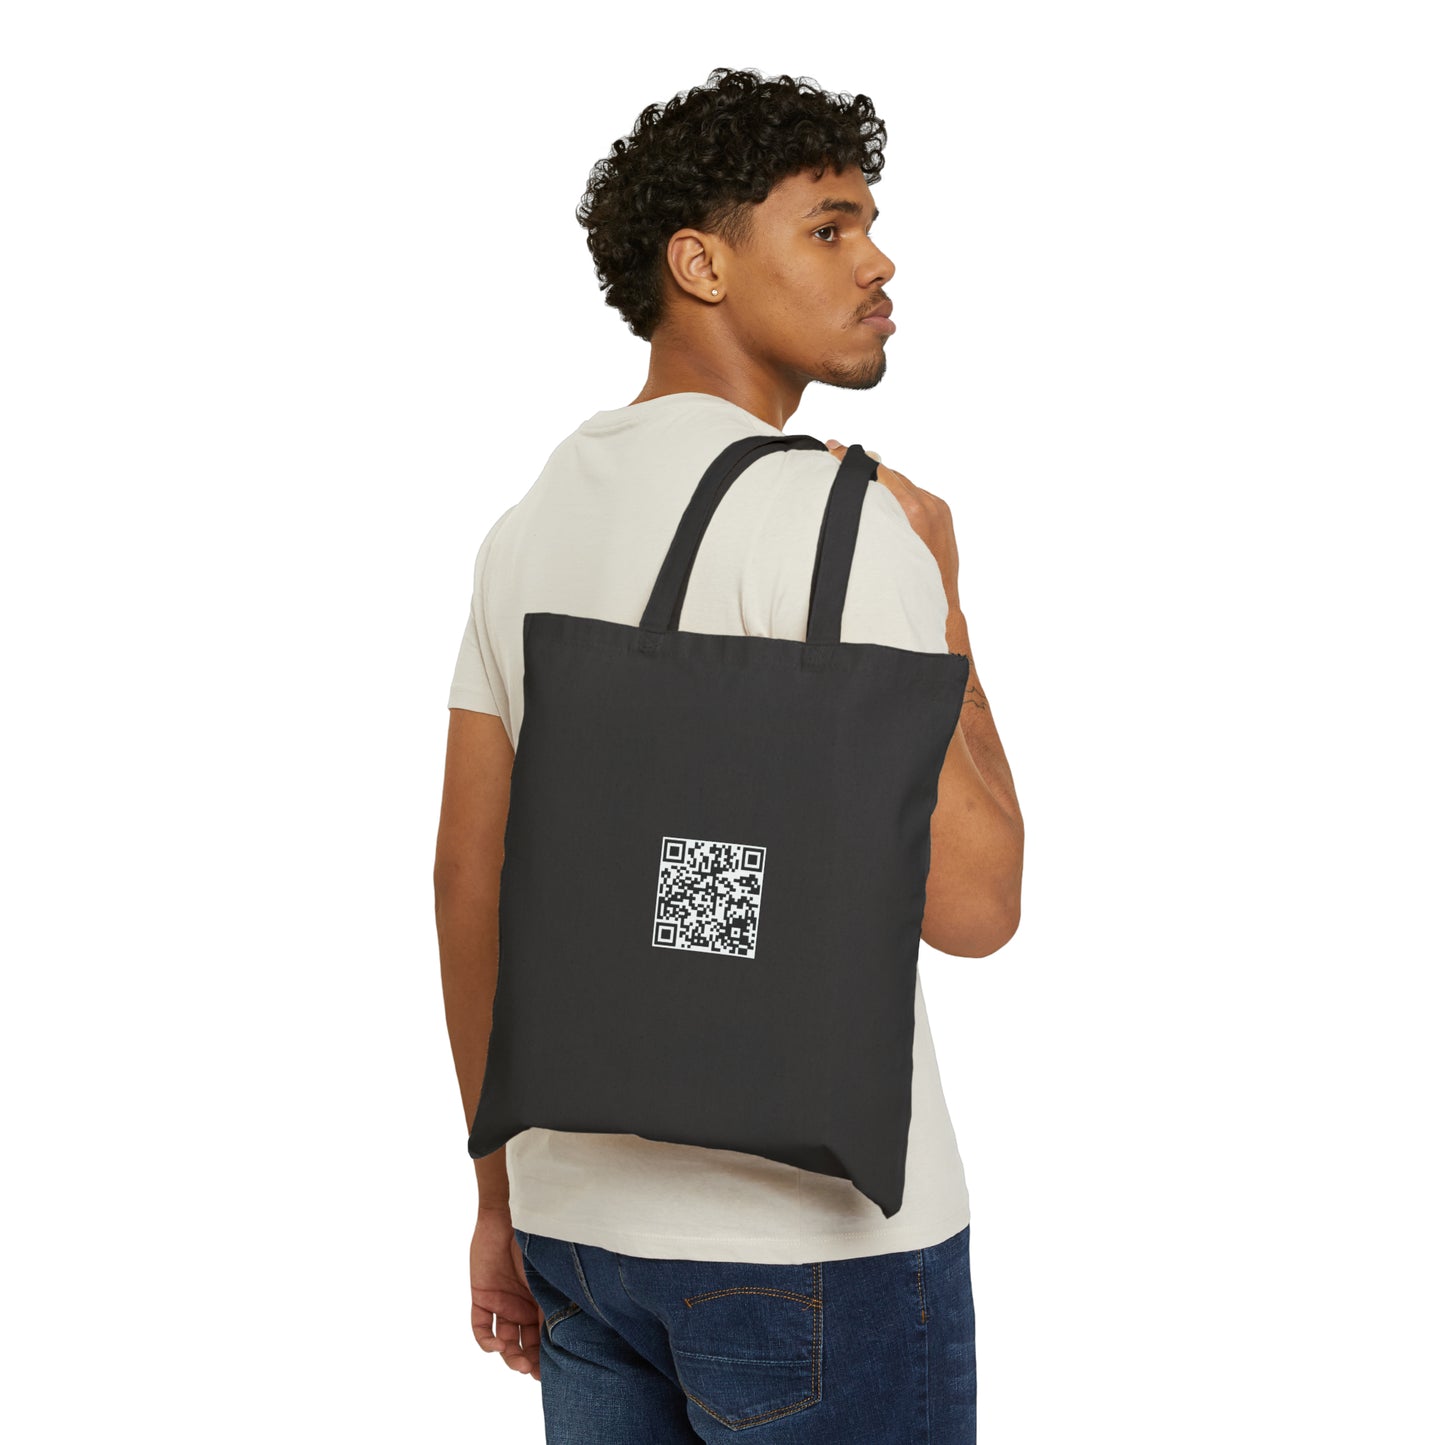 The Insiders' Club - Cotton Canvas Tote Bag